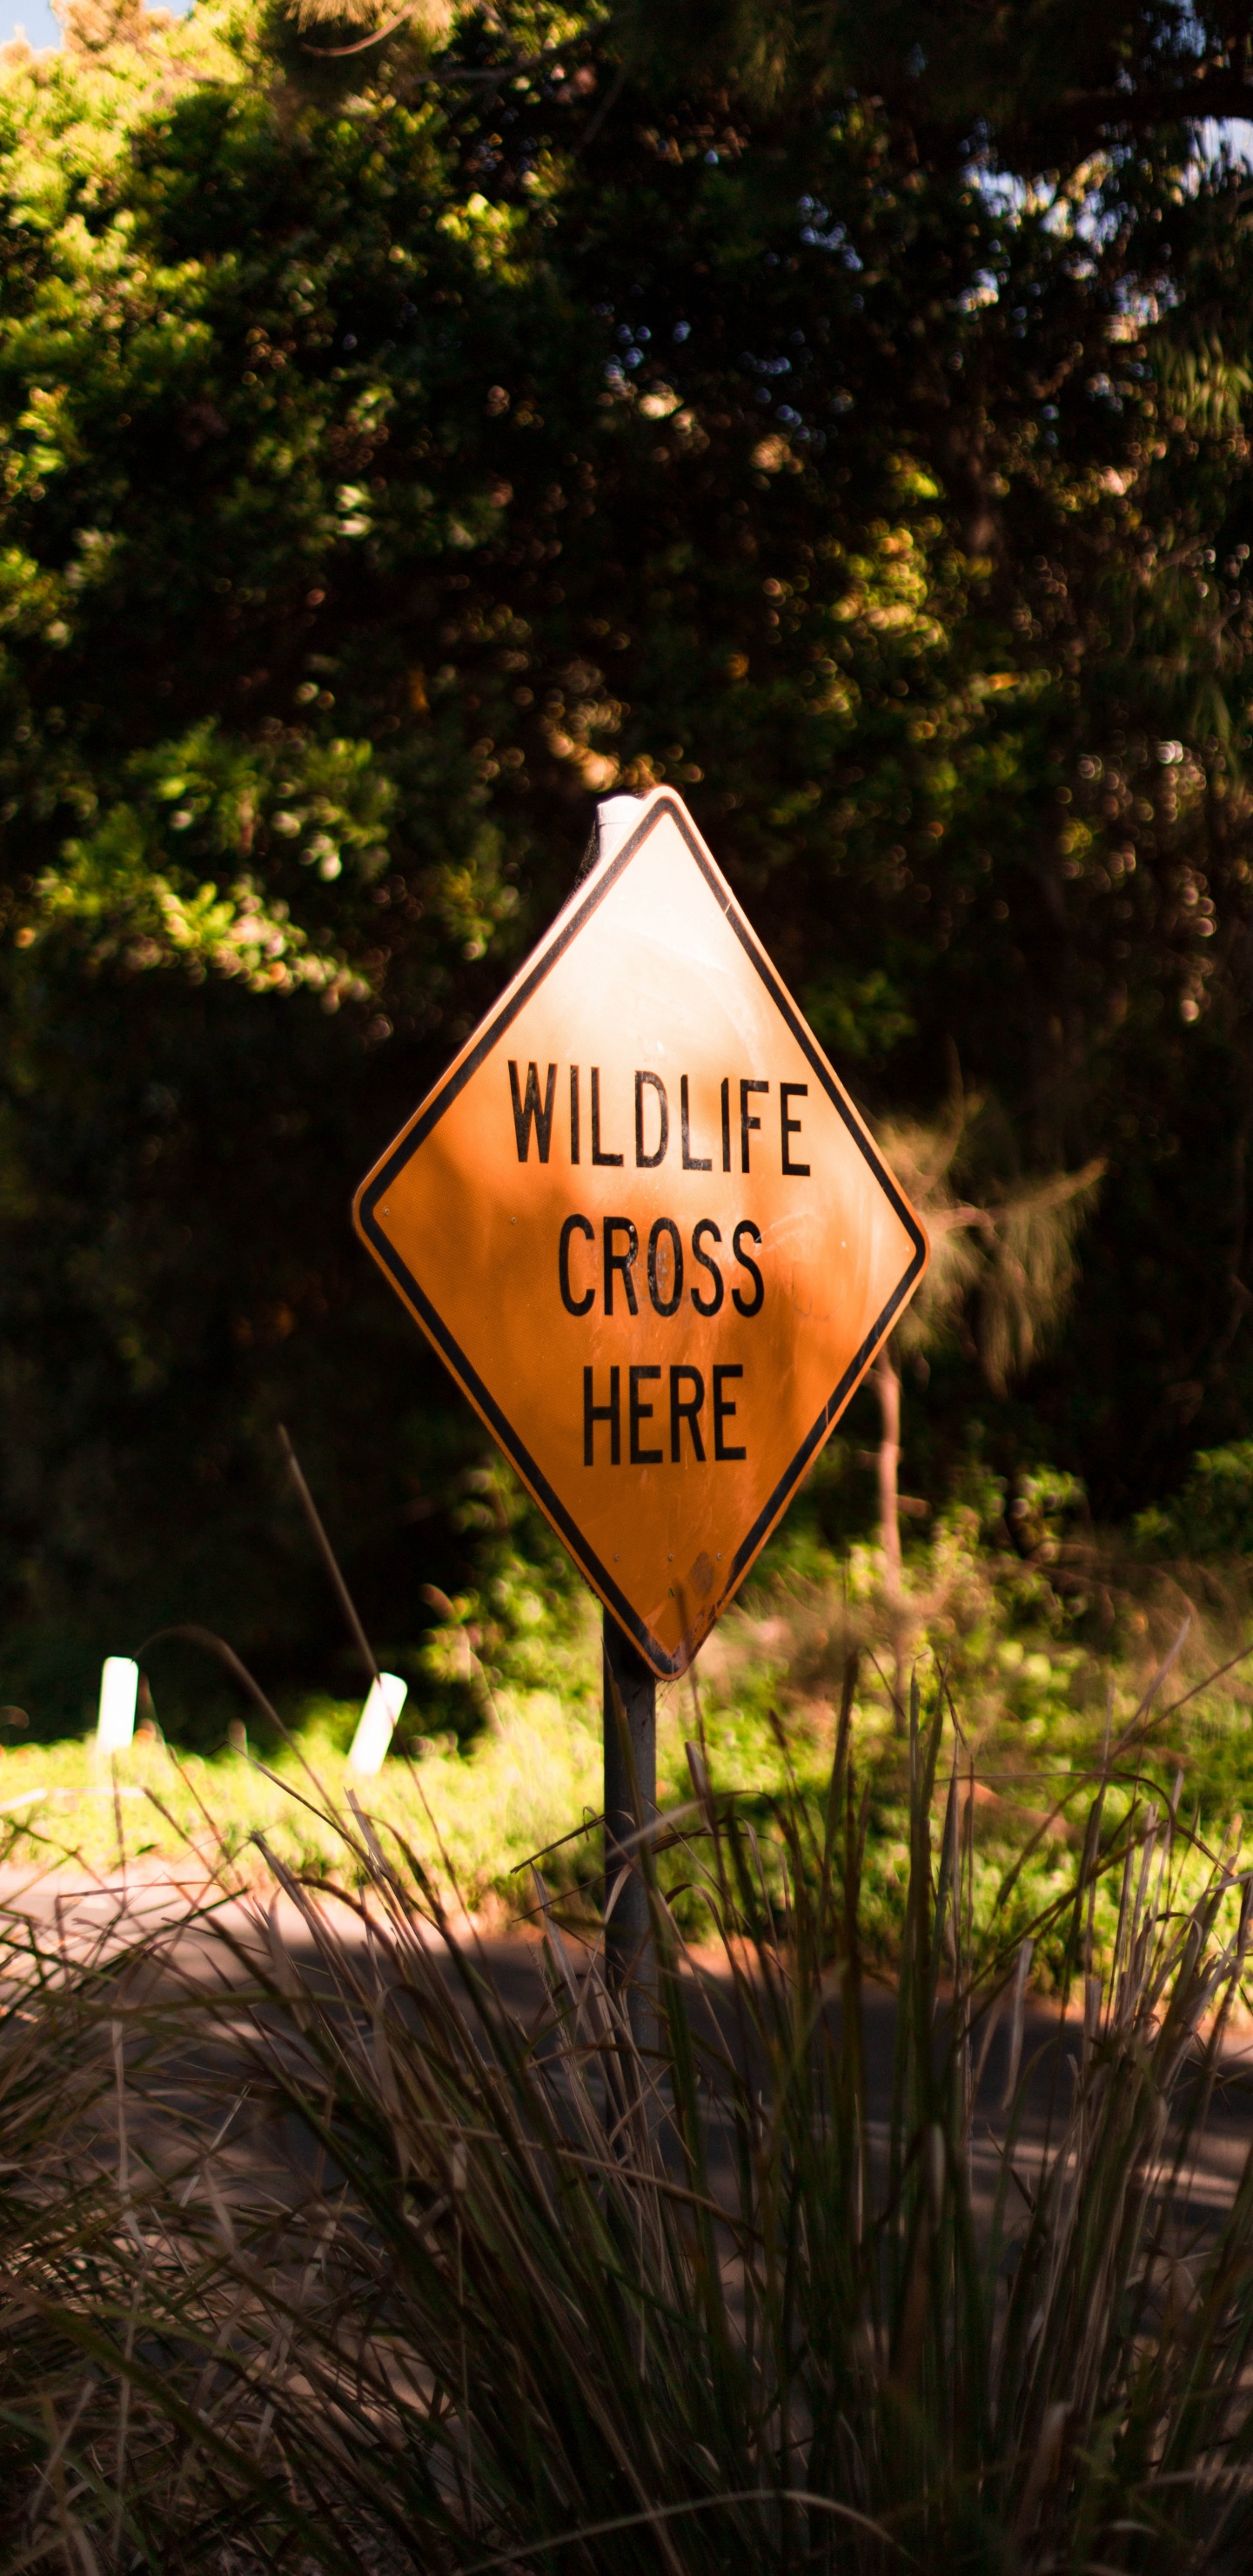 Brown and White Road Sign. Wallpaper in 1440x2960 Resolution